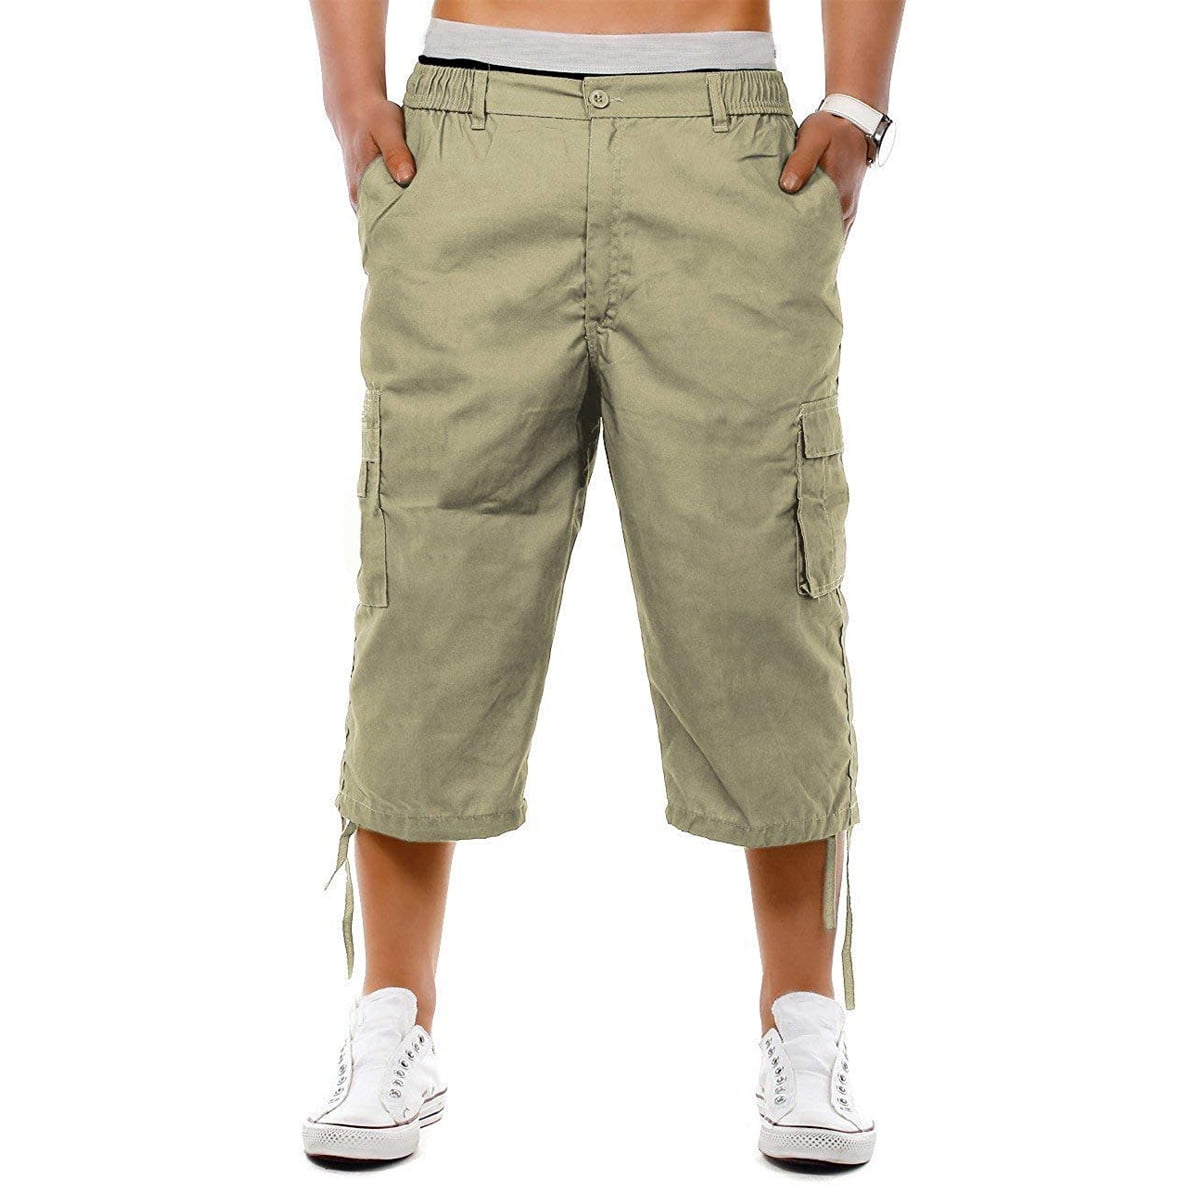 LIGHT WEIGHT SHORTS/QUARTER/ PANTS TROUSERS 3 IN 1 MENS SUMMER ELASTICATED 